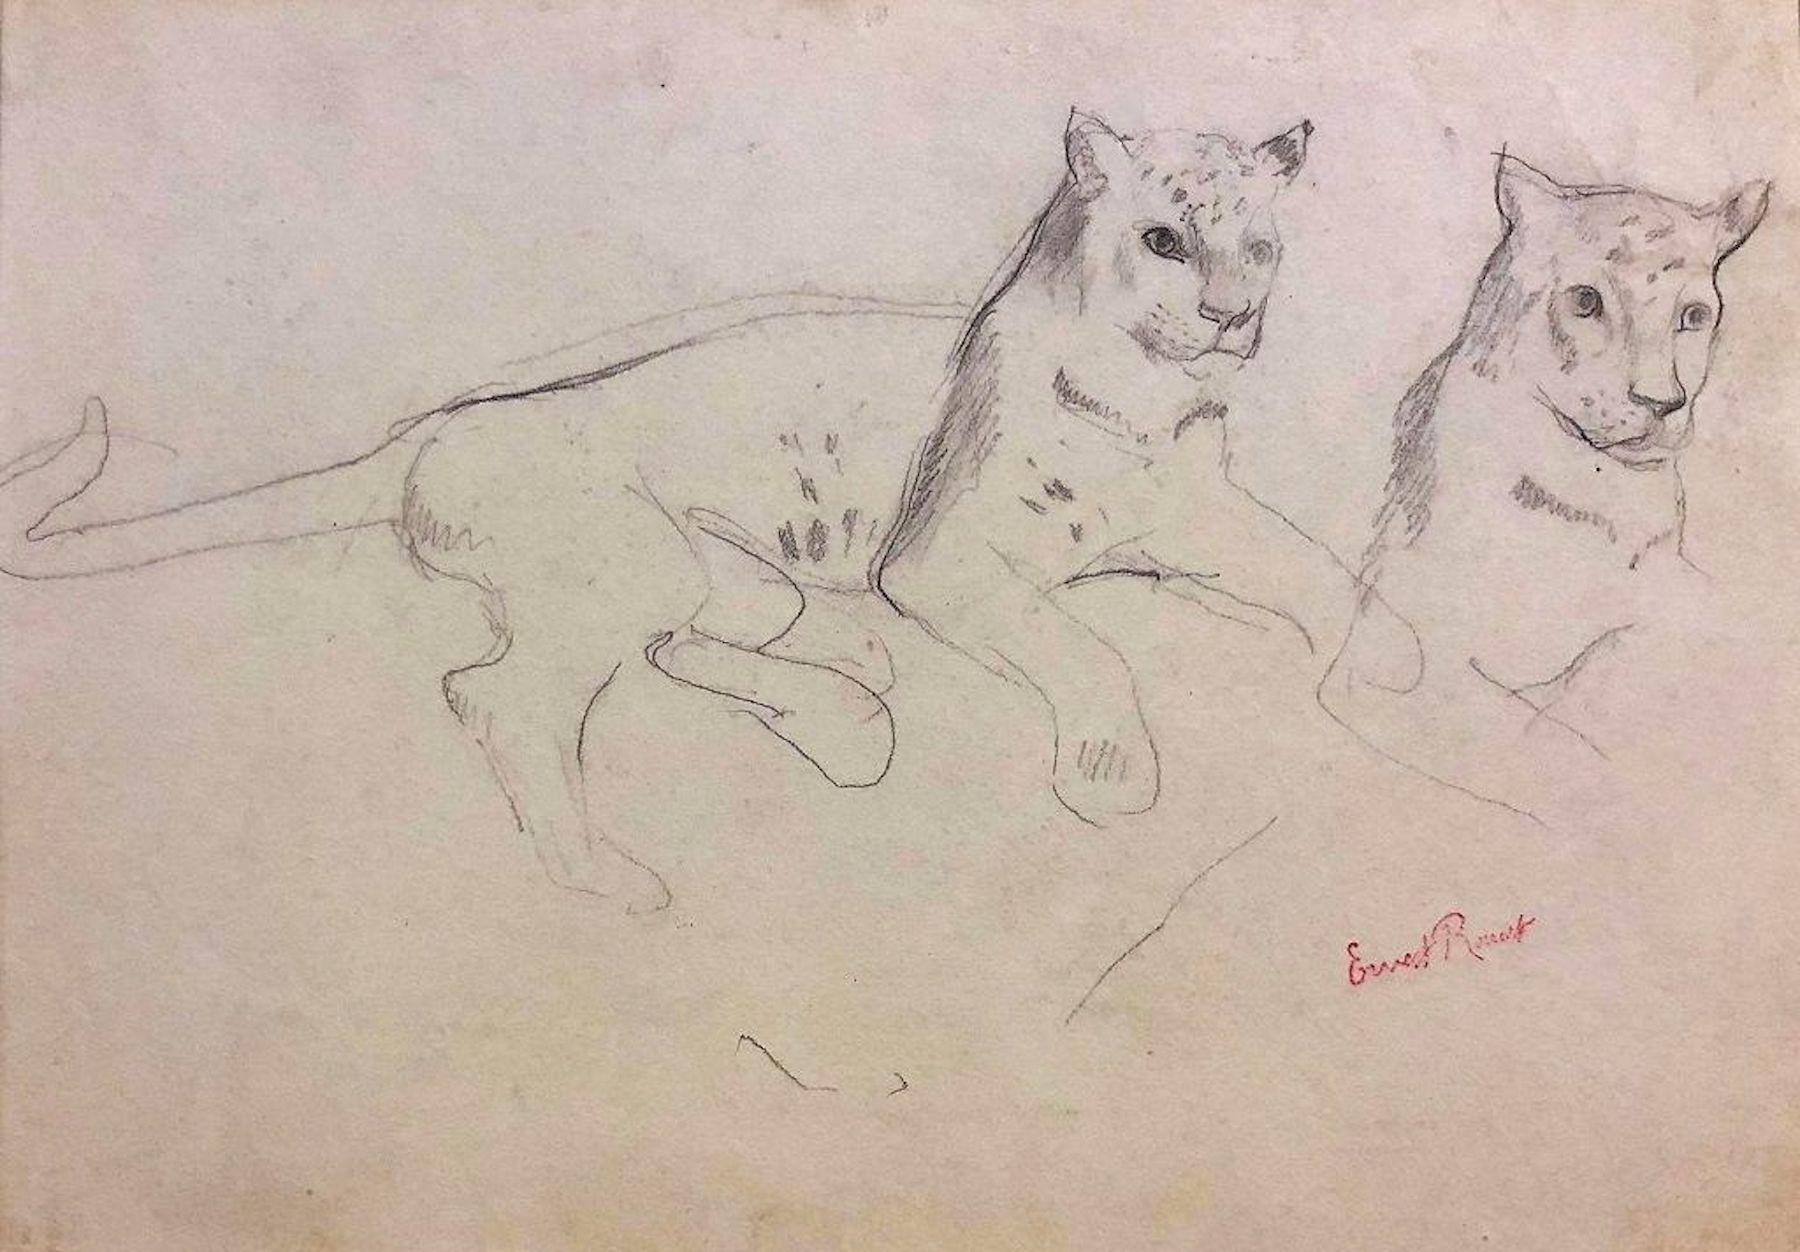 Couple of Cheetahs - Original Pencil Drawing by Ernest Rouart - Early 1900